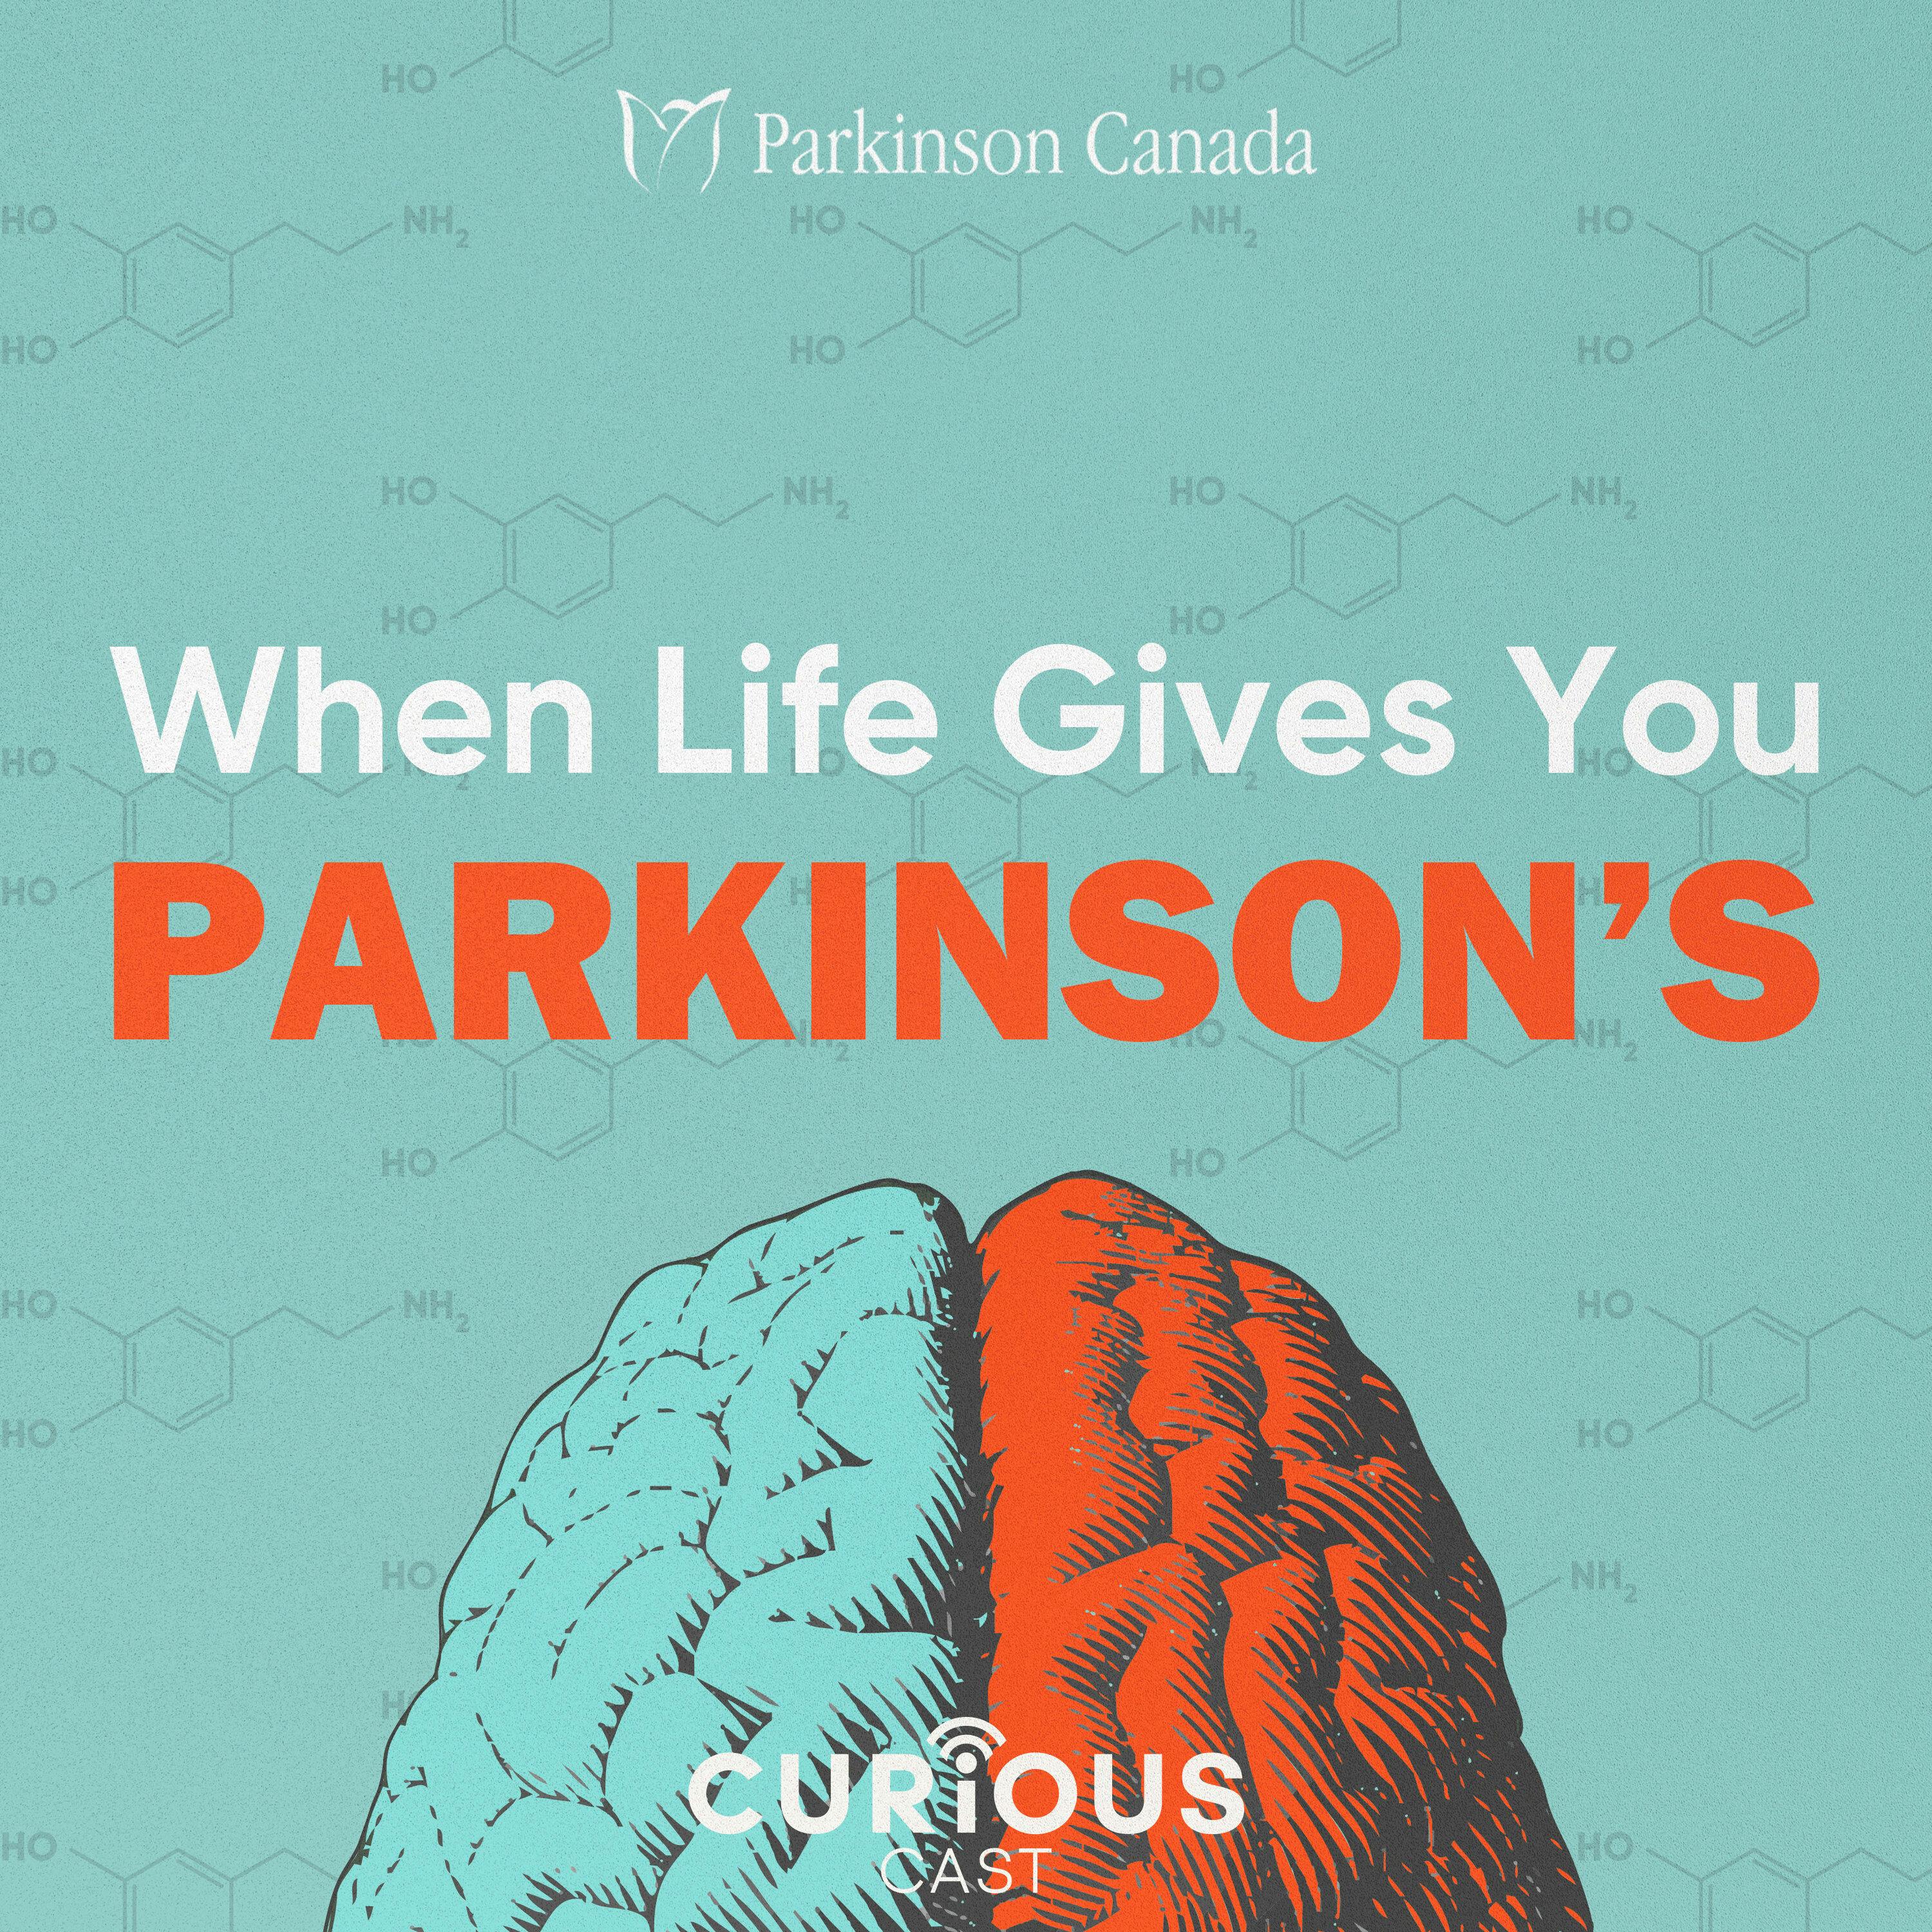 A conversation with Dave Clark on Parkinson’s, broadcasting, and life